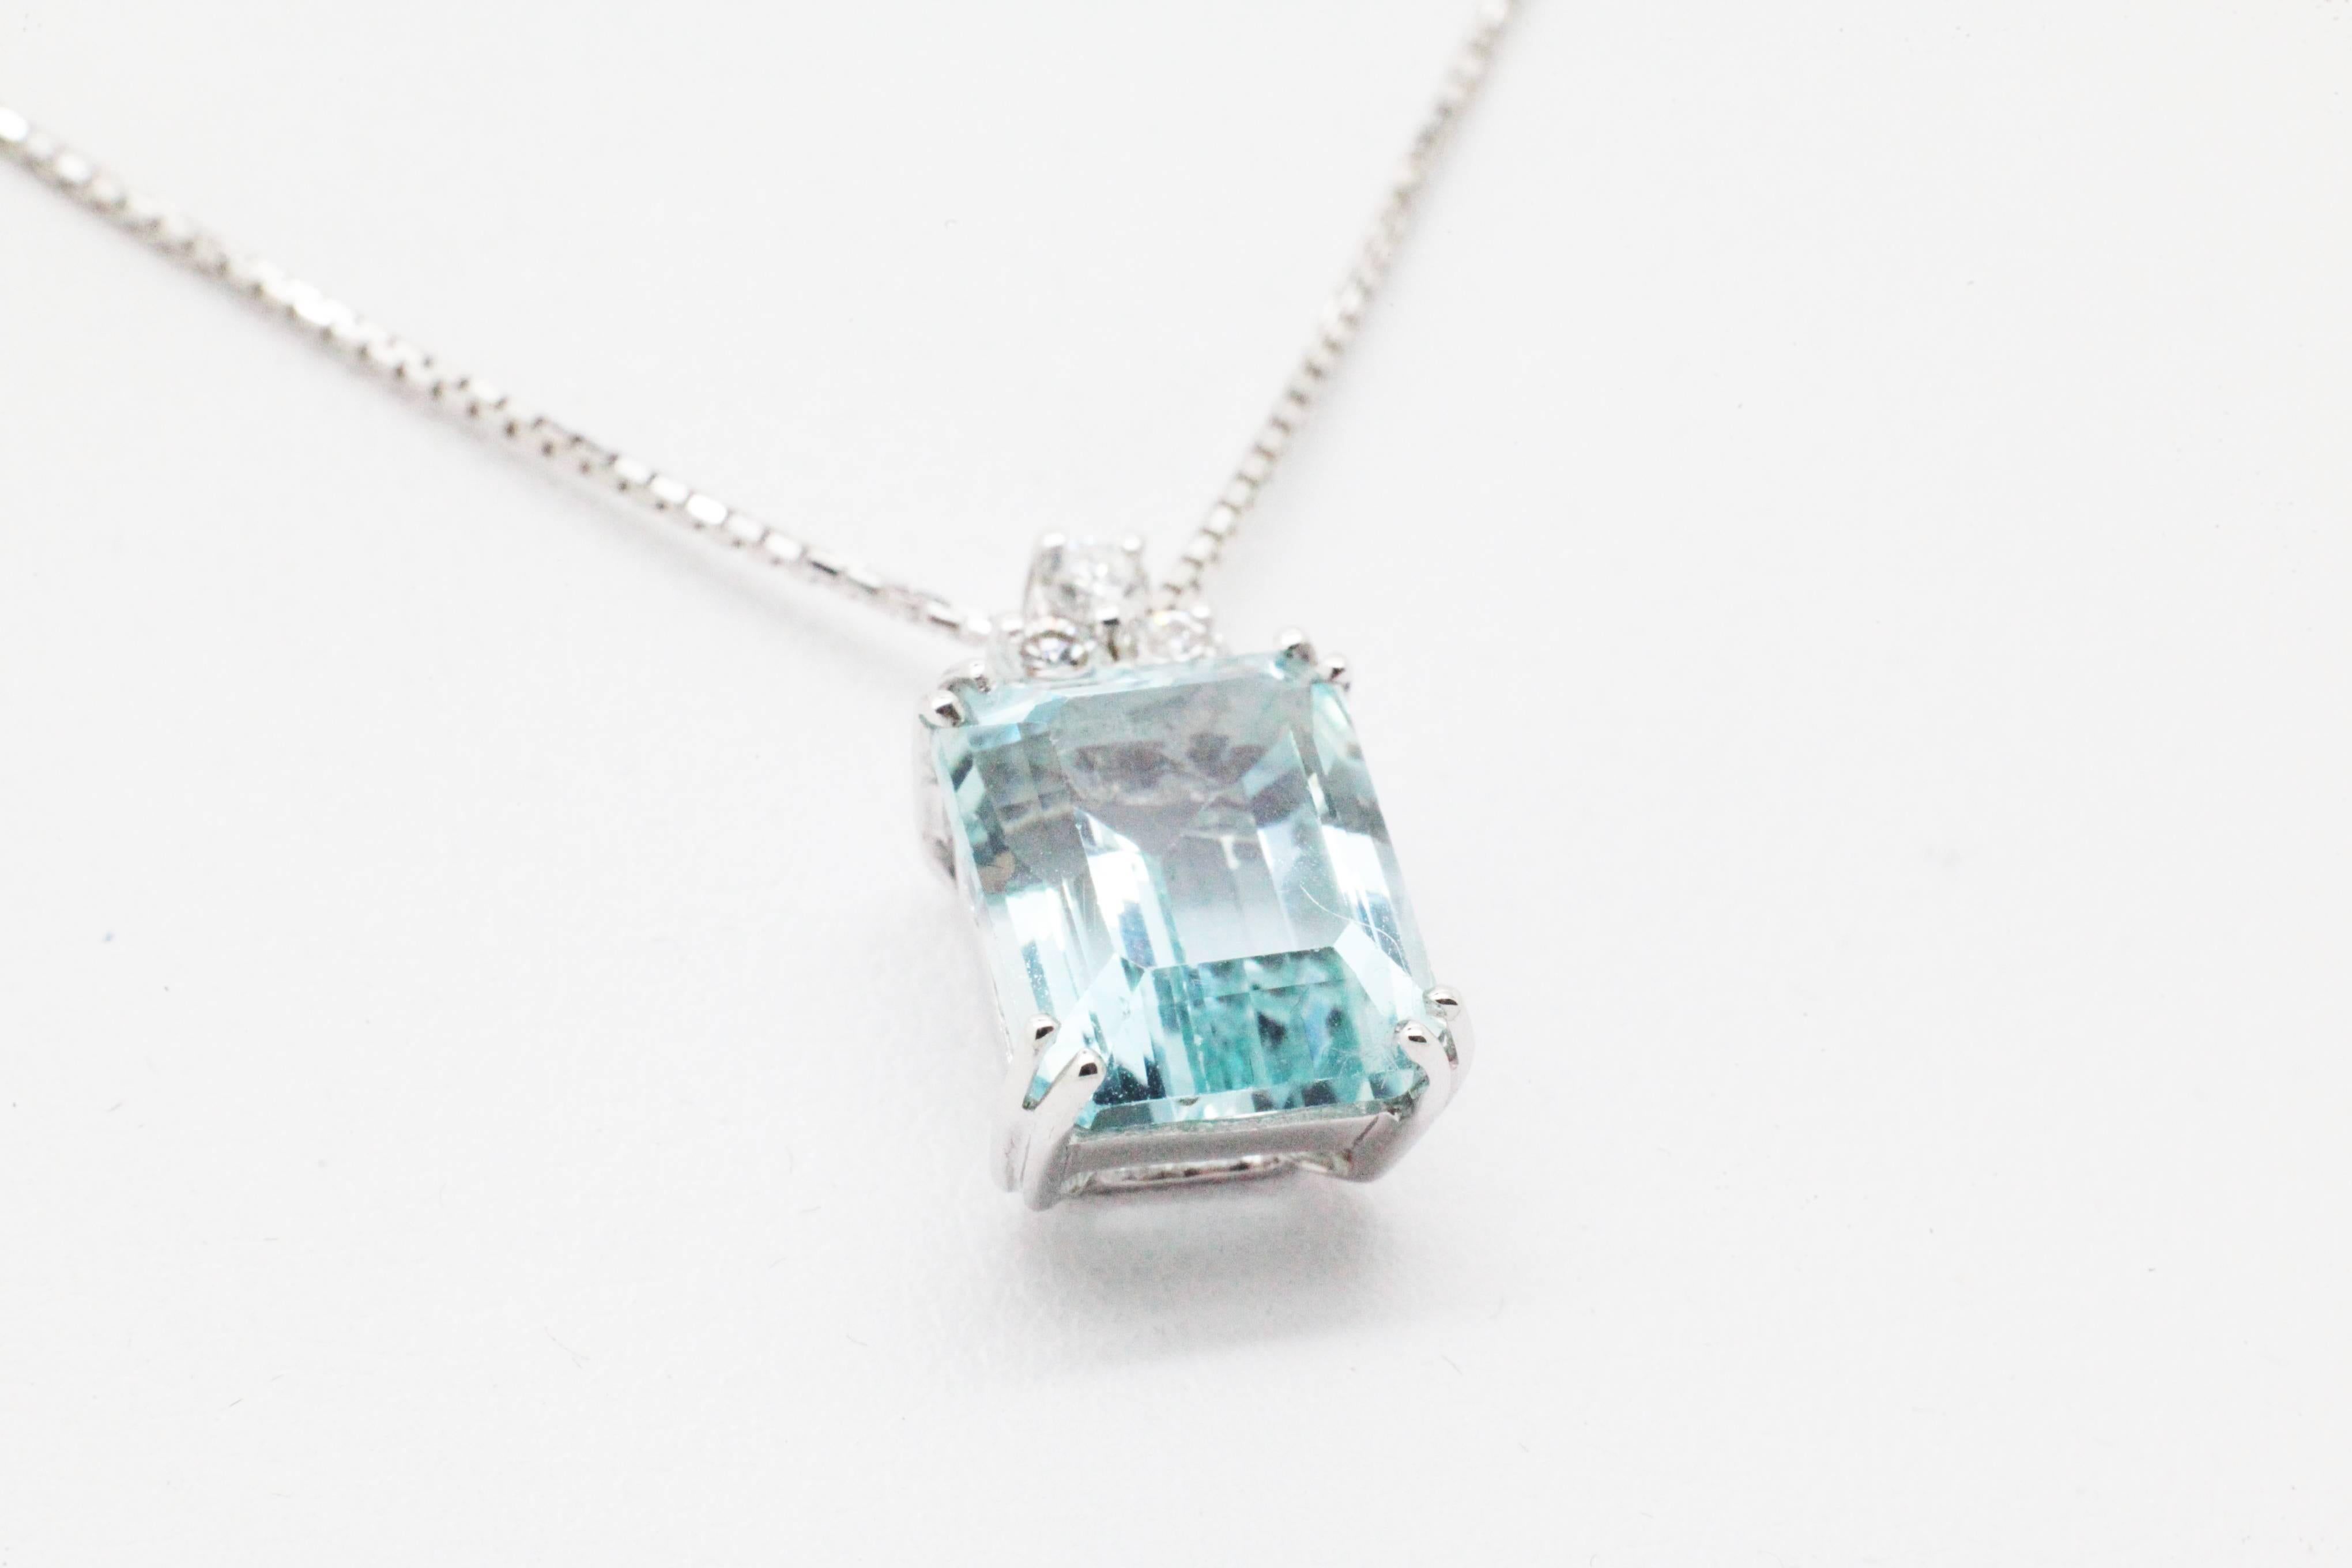 This piece from FERRUCCI  showcase a 2.75 carats natural Aquamarine emerald cut stone, adorned by 0.08 carats white diamonds mounted in 18k white gold necklace, 16 inches long.